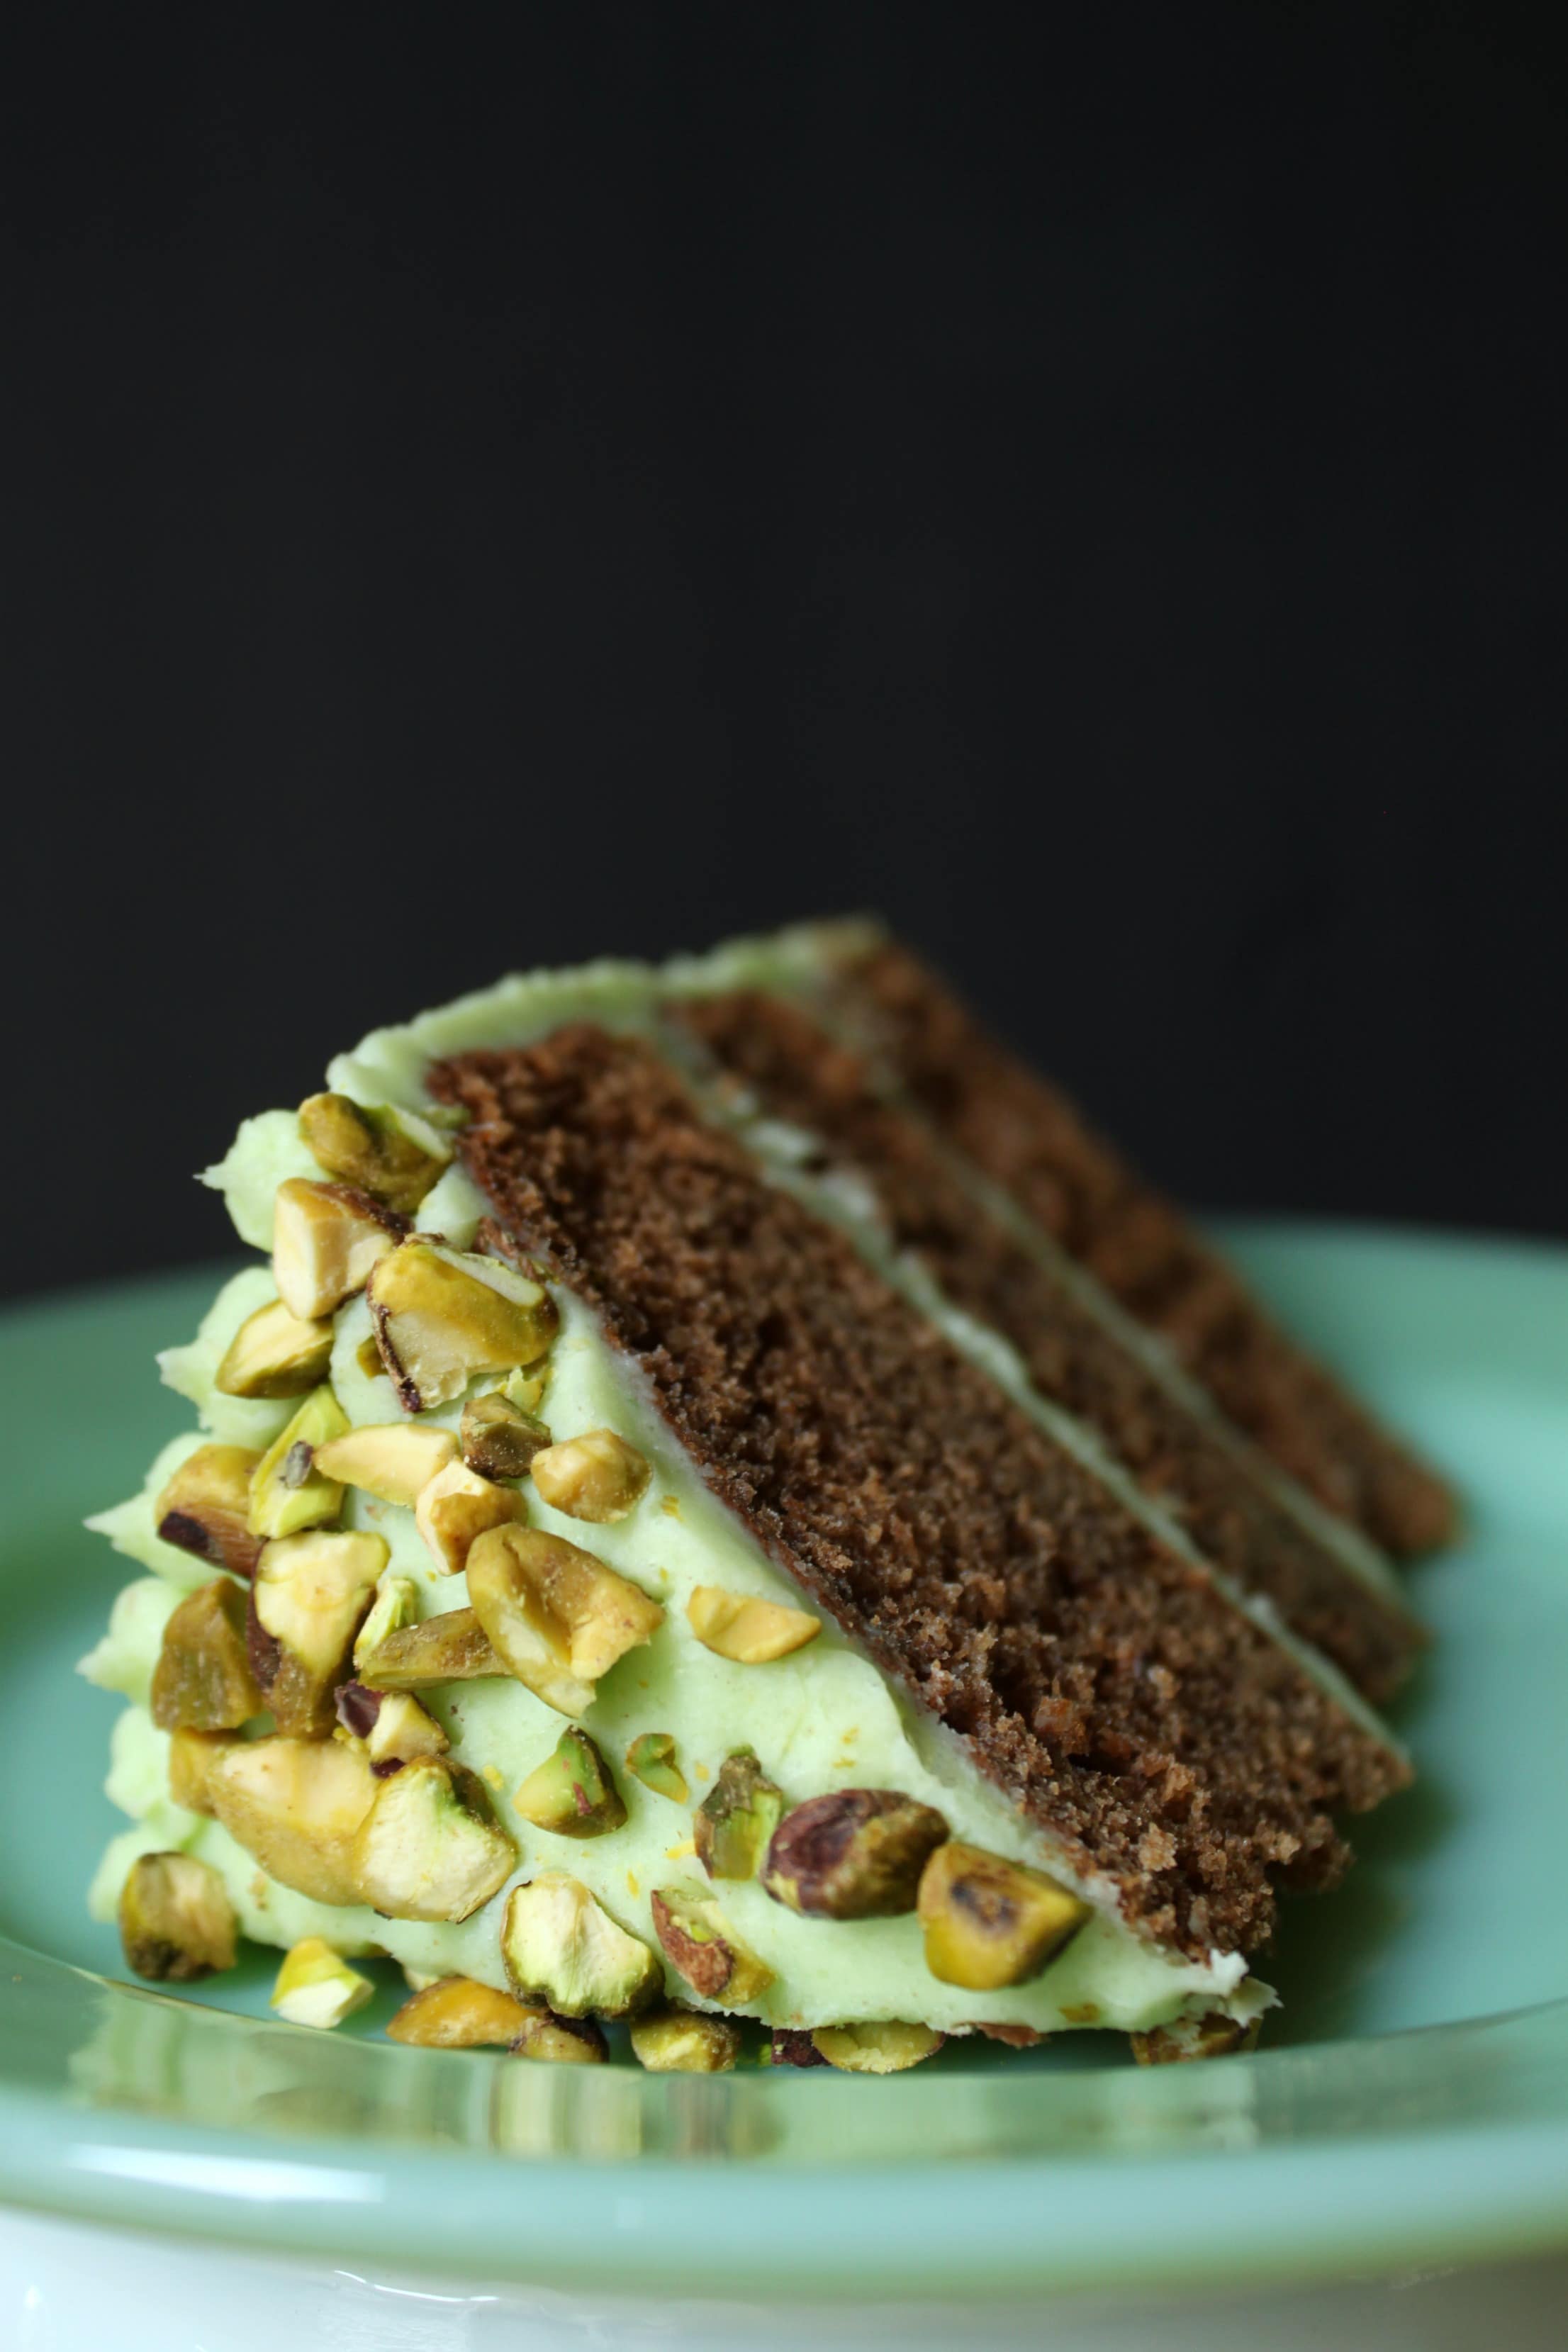 This Chai Layer Cake with Pistachio Buttercream is sweet little cake with a whole lot of attitude. Recipe makes three 6 inch layer cakes and enough pistachio buttercream to sandwich between layers, cover the cake, and all some decorative touches. #birthdaycake #chaicake #layercake #pistachiobutercream